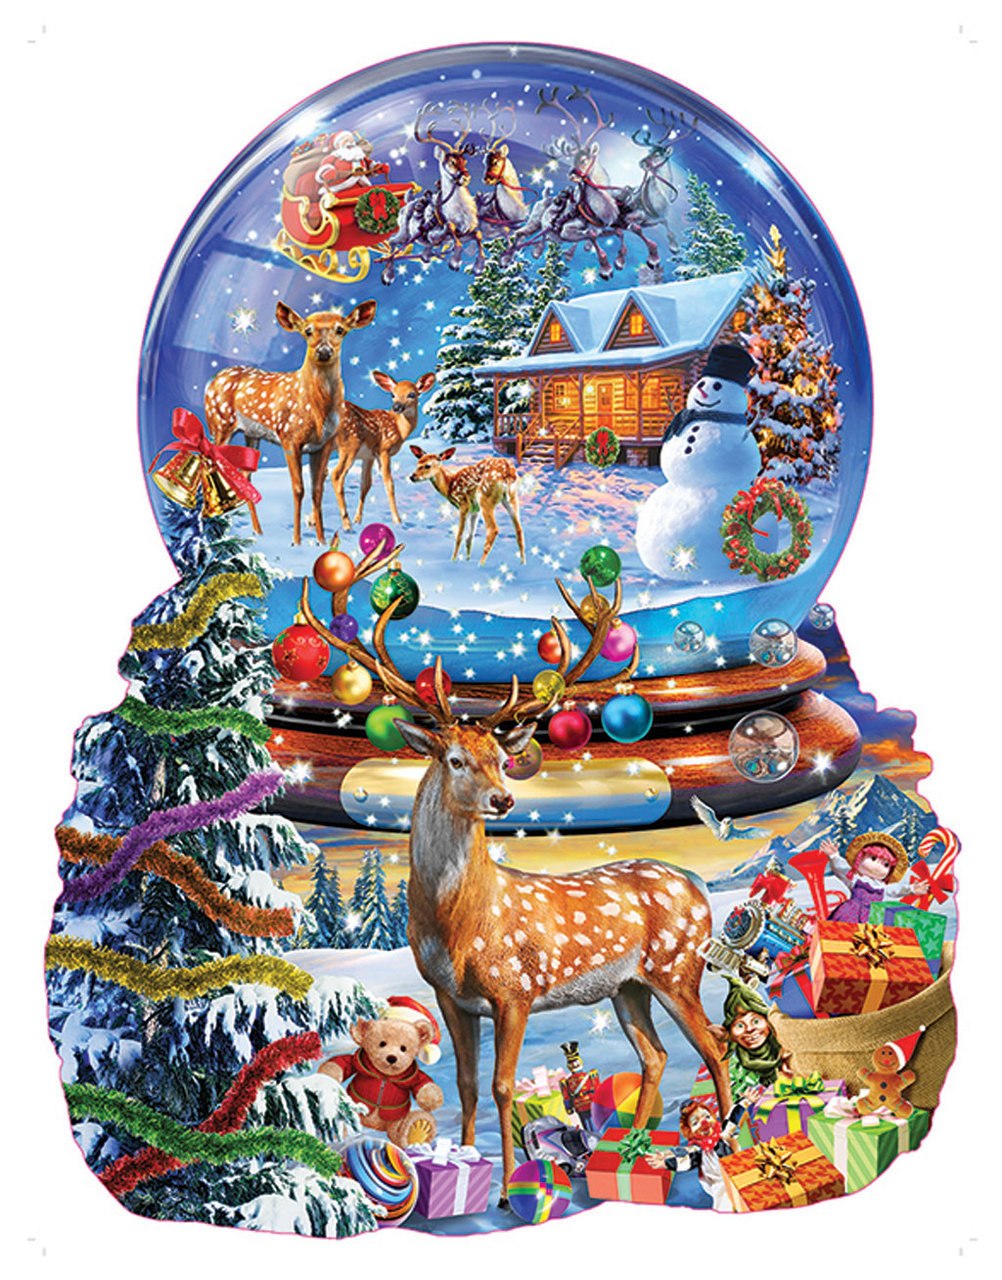 Christmas Snow Globe - 1000pc Shaped Jigsaw Puzzle by Sunsout